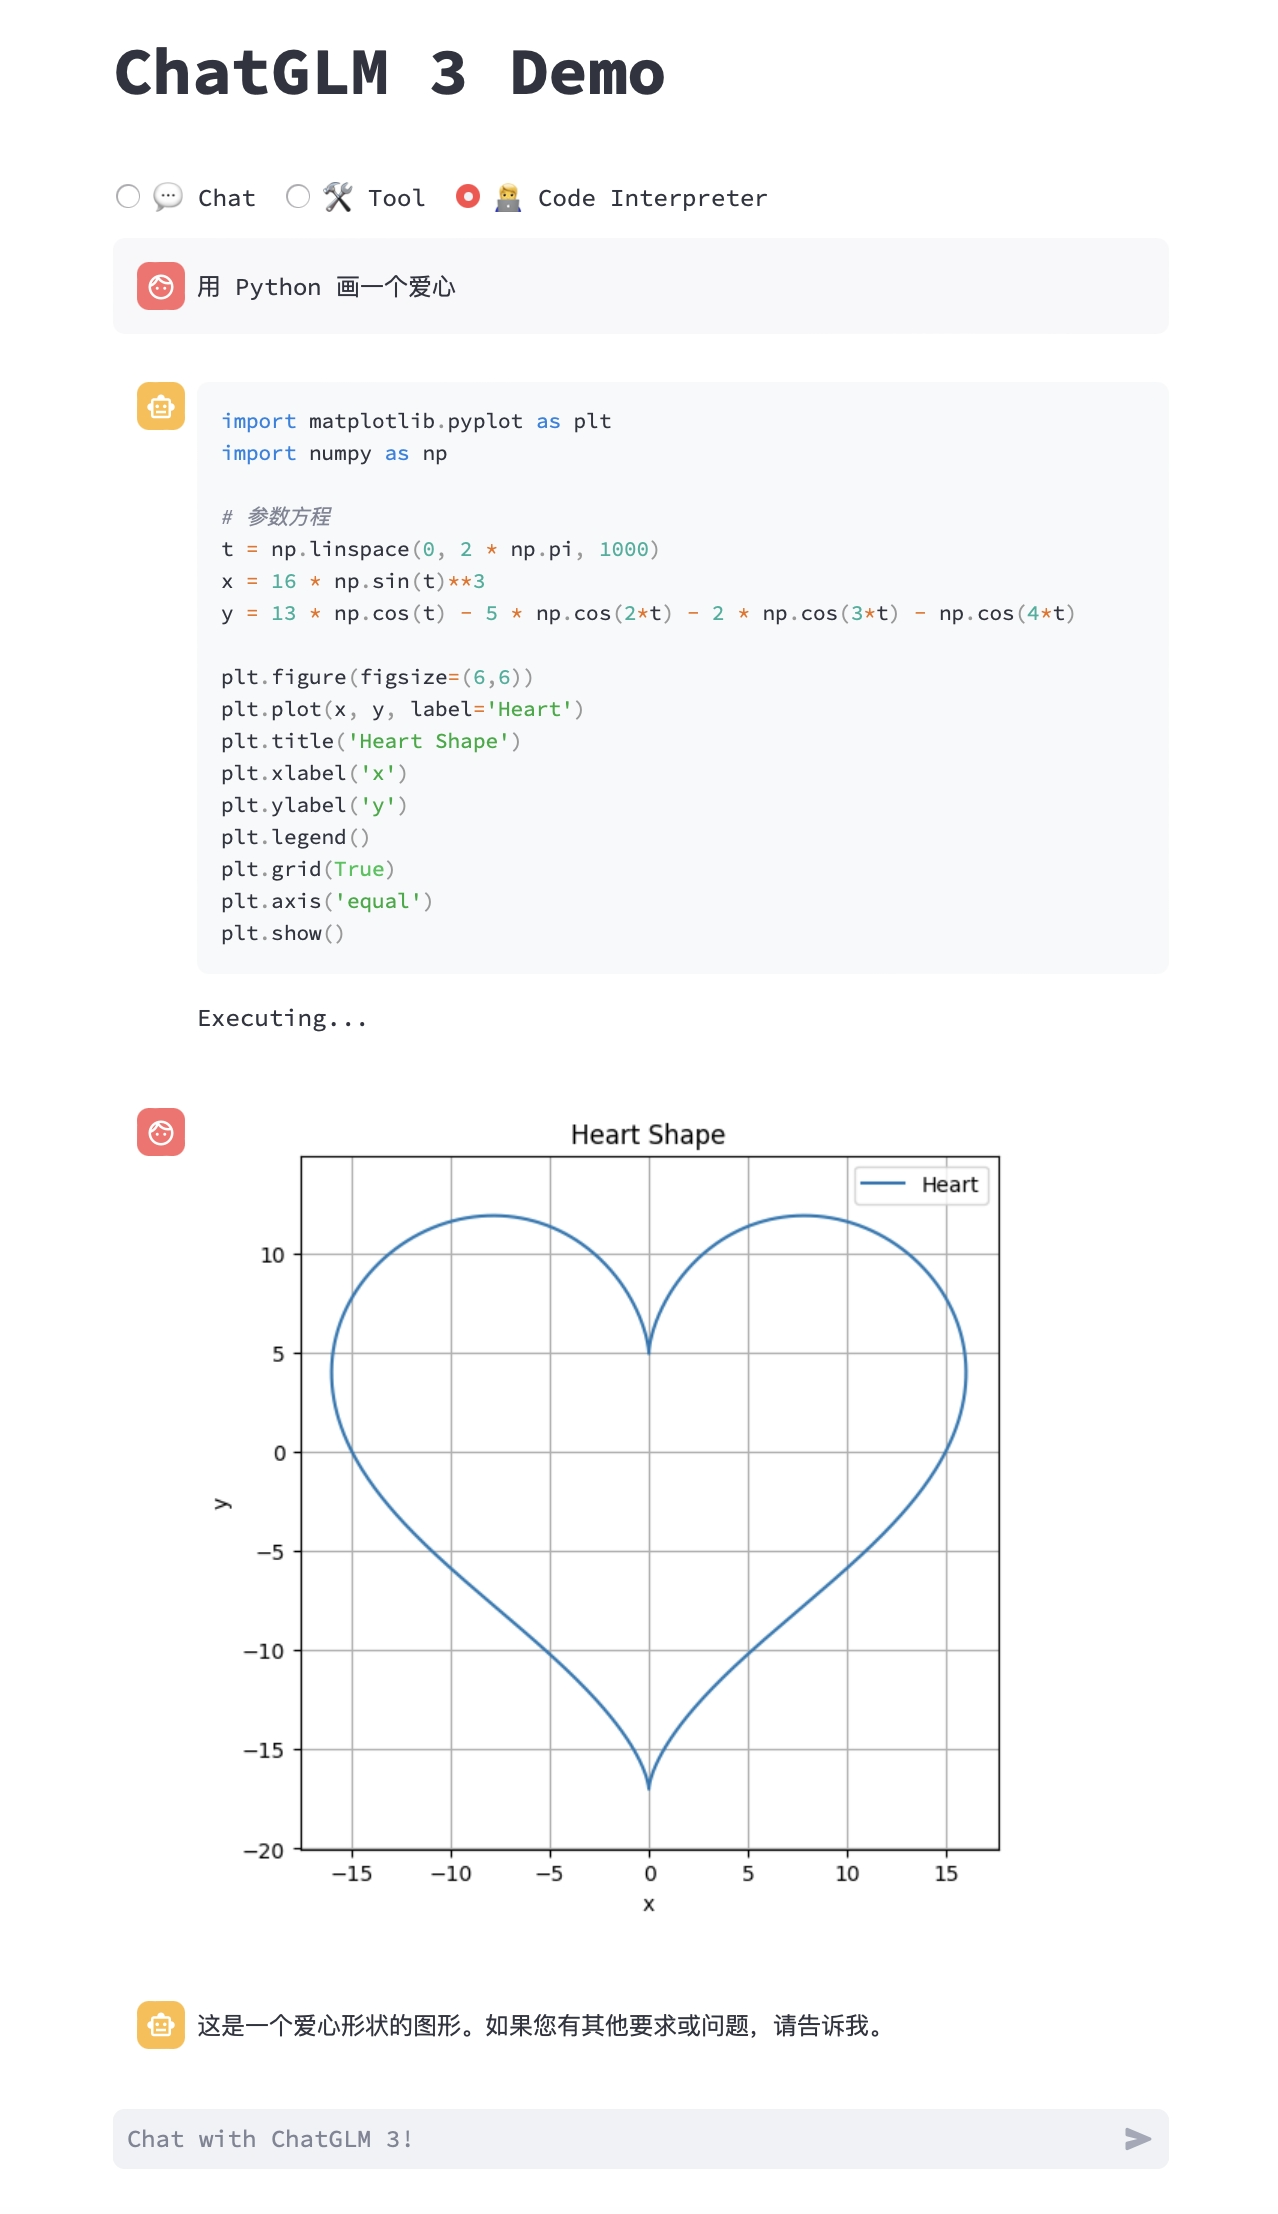 The code interpreter draws a heart according to the user's instructions.